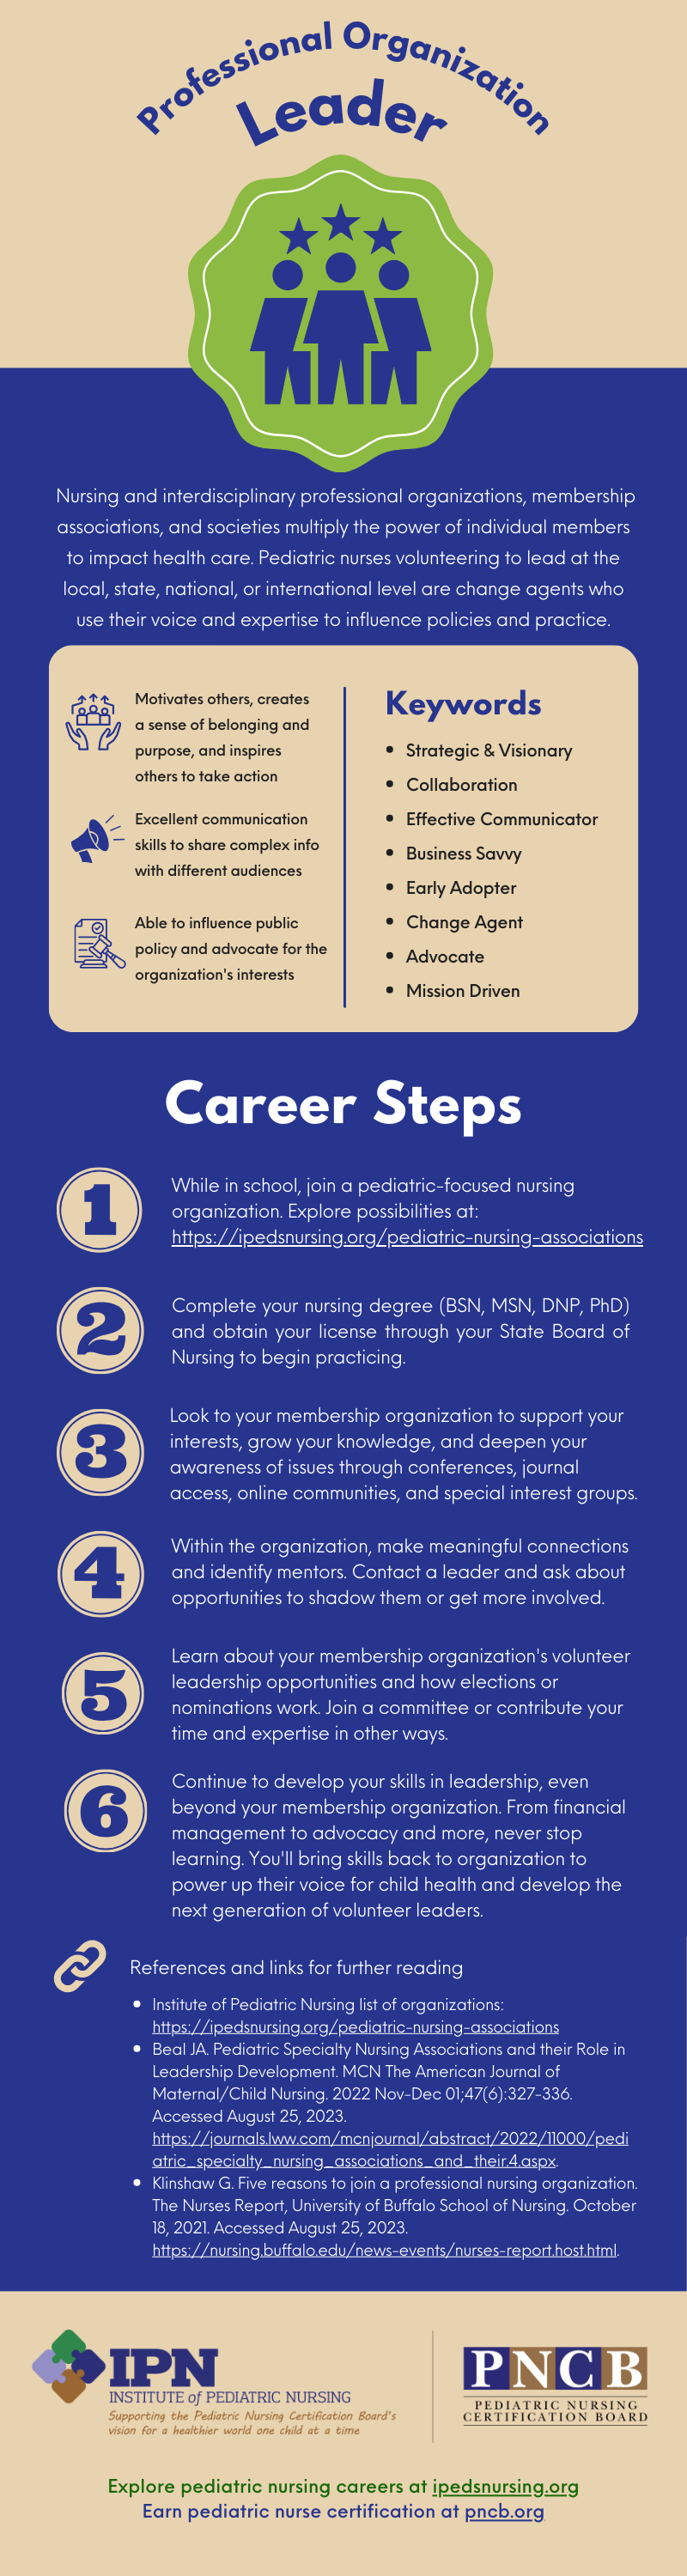 ID: Infographic describing steps to be a Professional Organization Leader - see PDF for details